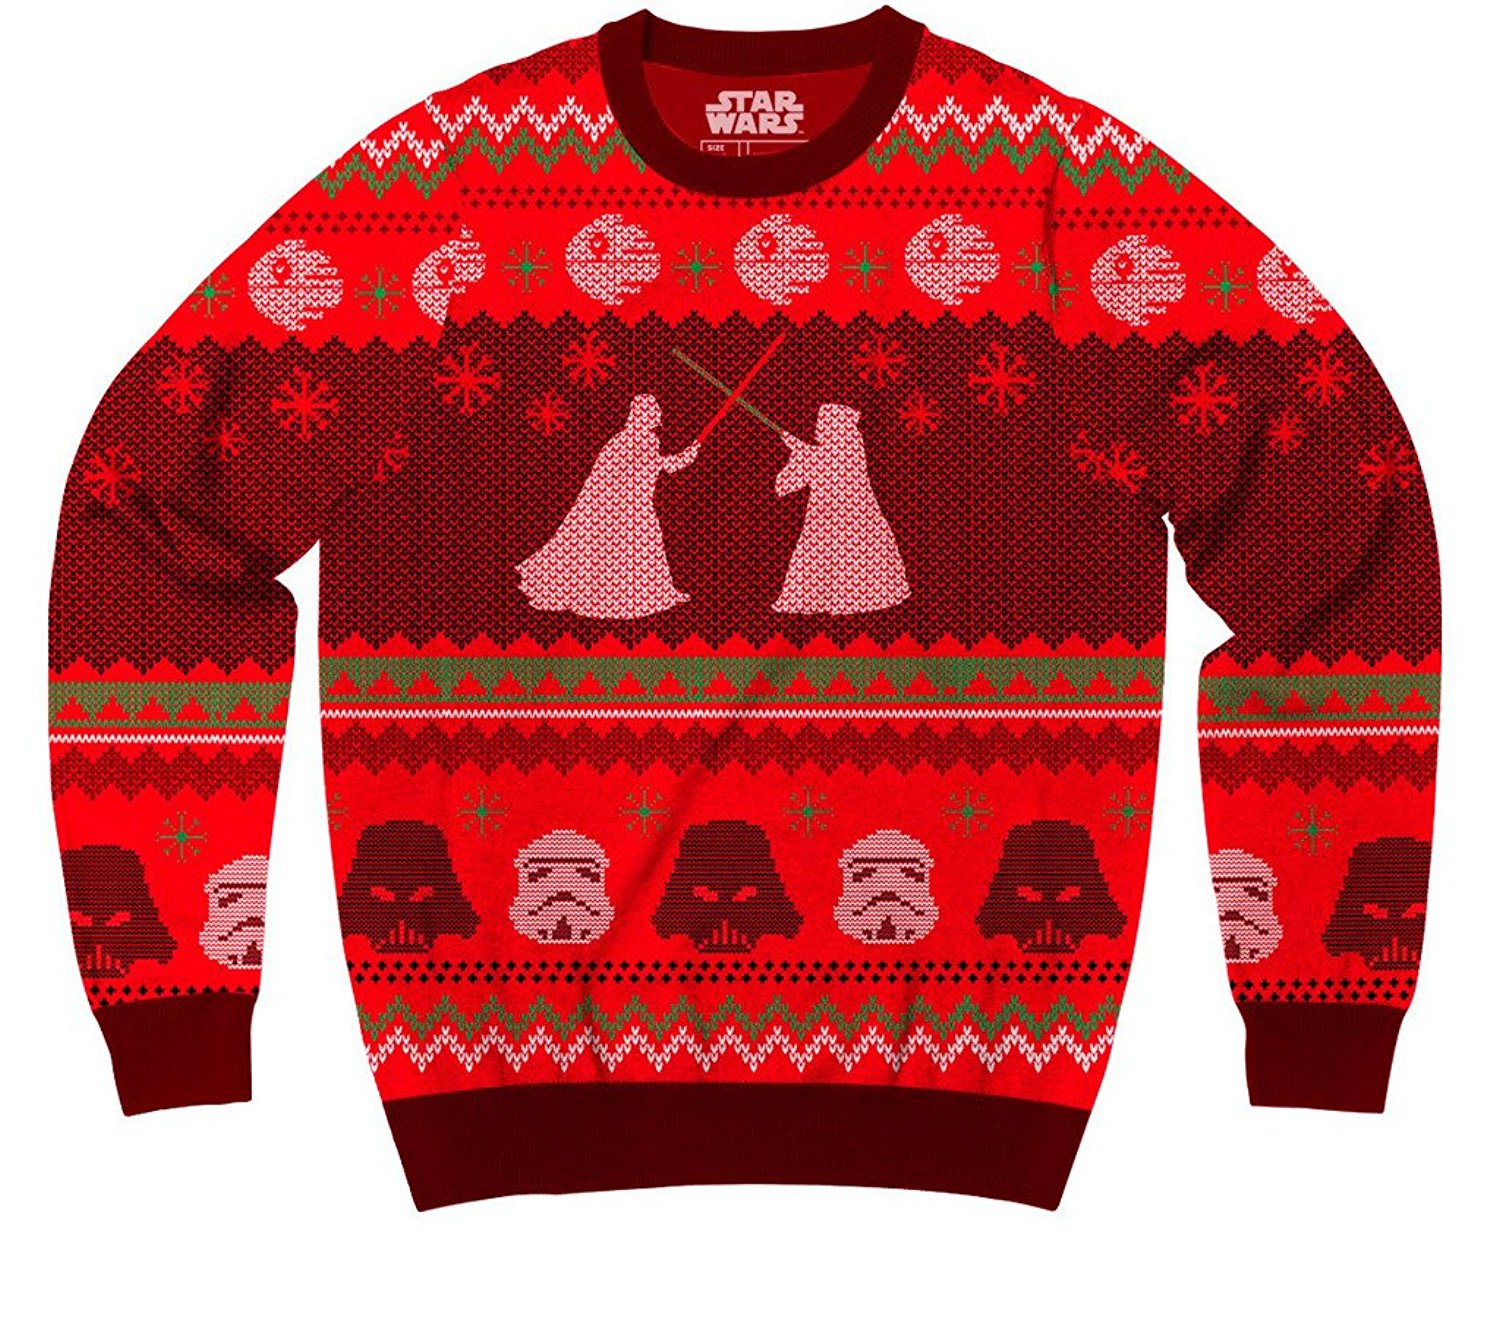 Red holiday sweater featuring Star Wars motif